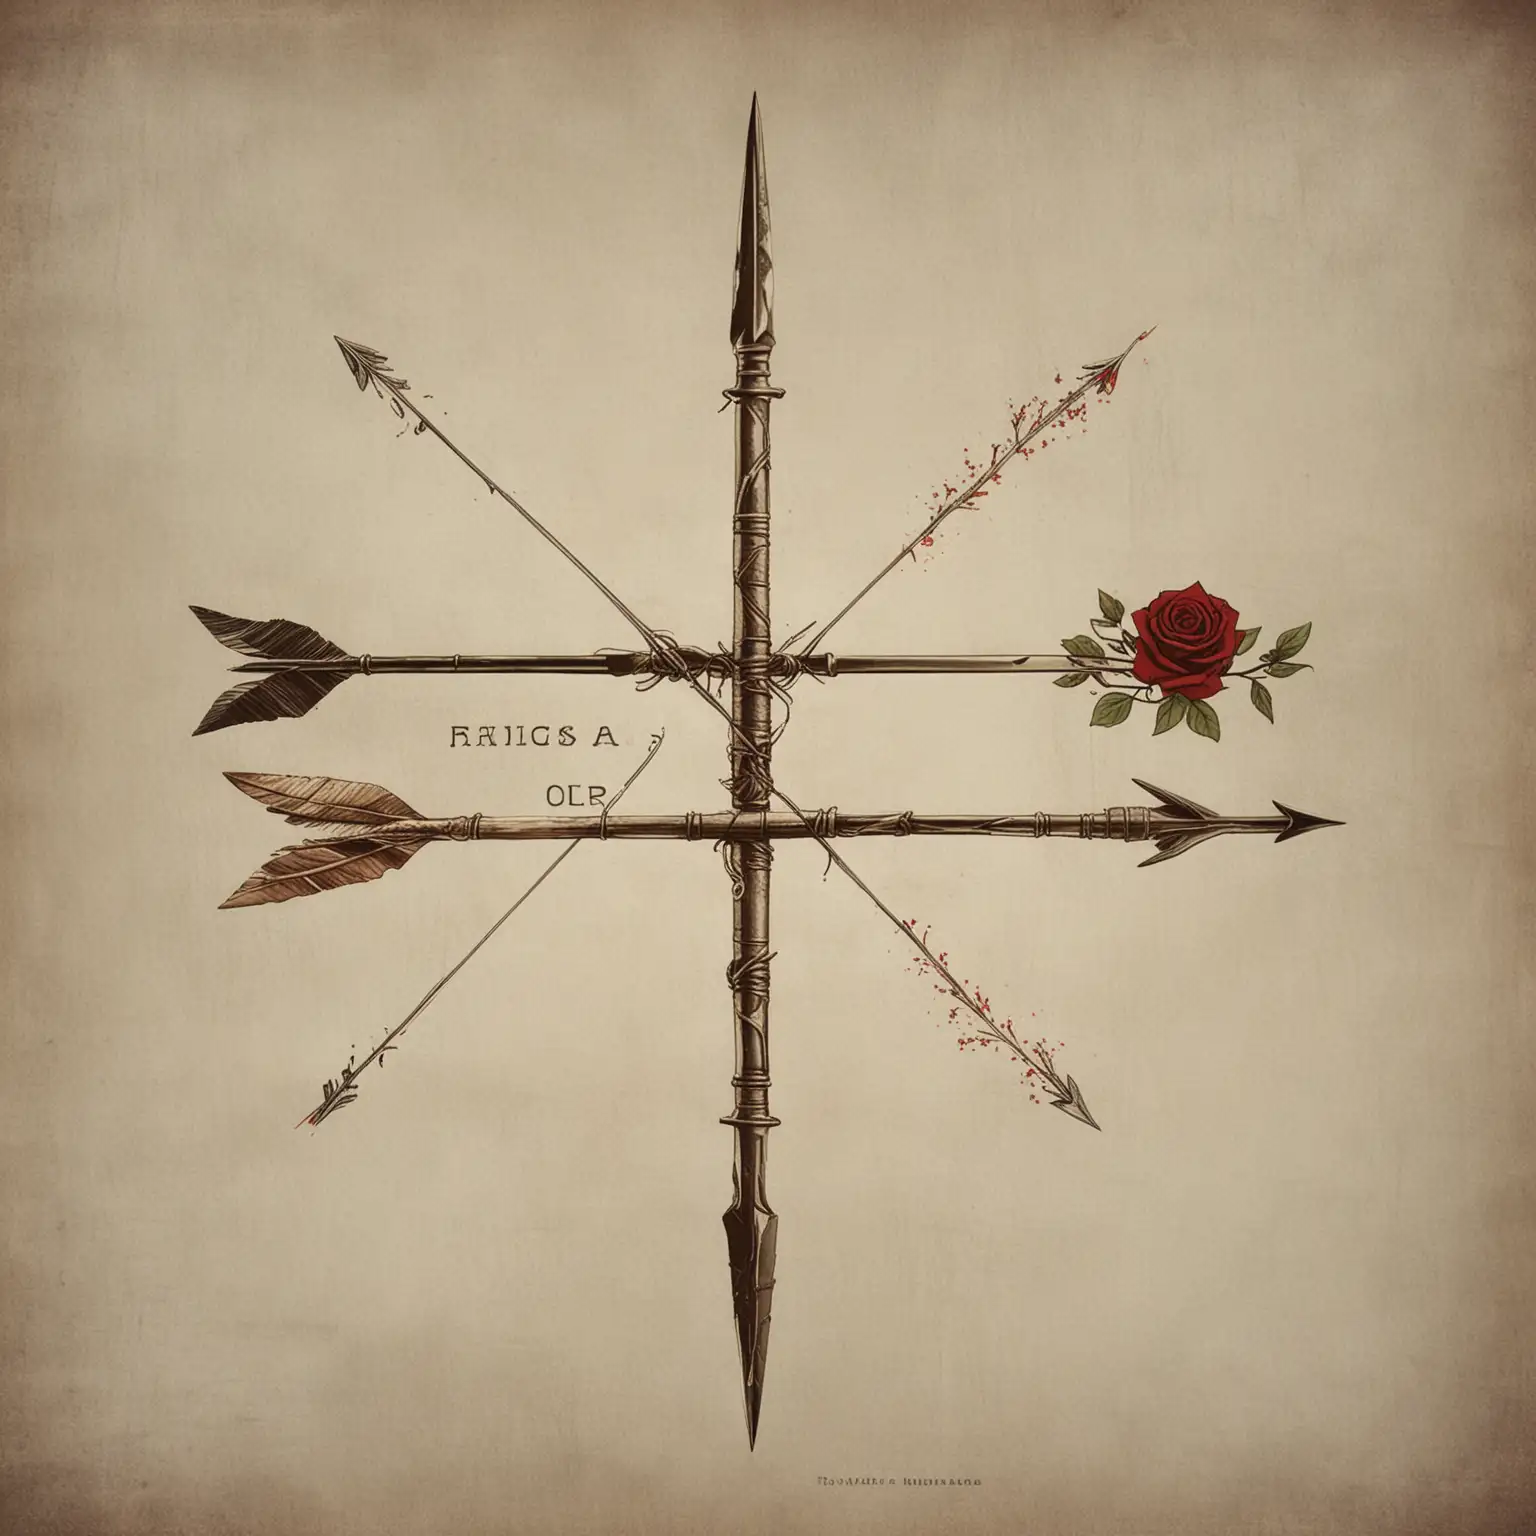 Create a minimalist design for a company called savage romance that says "Amnesia or die", includes a hunting arrow and an Irish rose. make it edgy with a nod to femininity. neutral colors. 